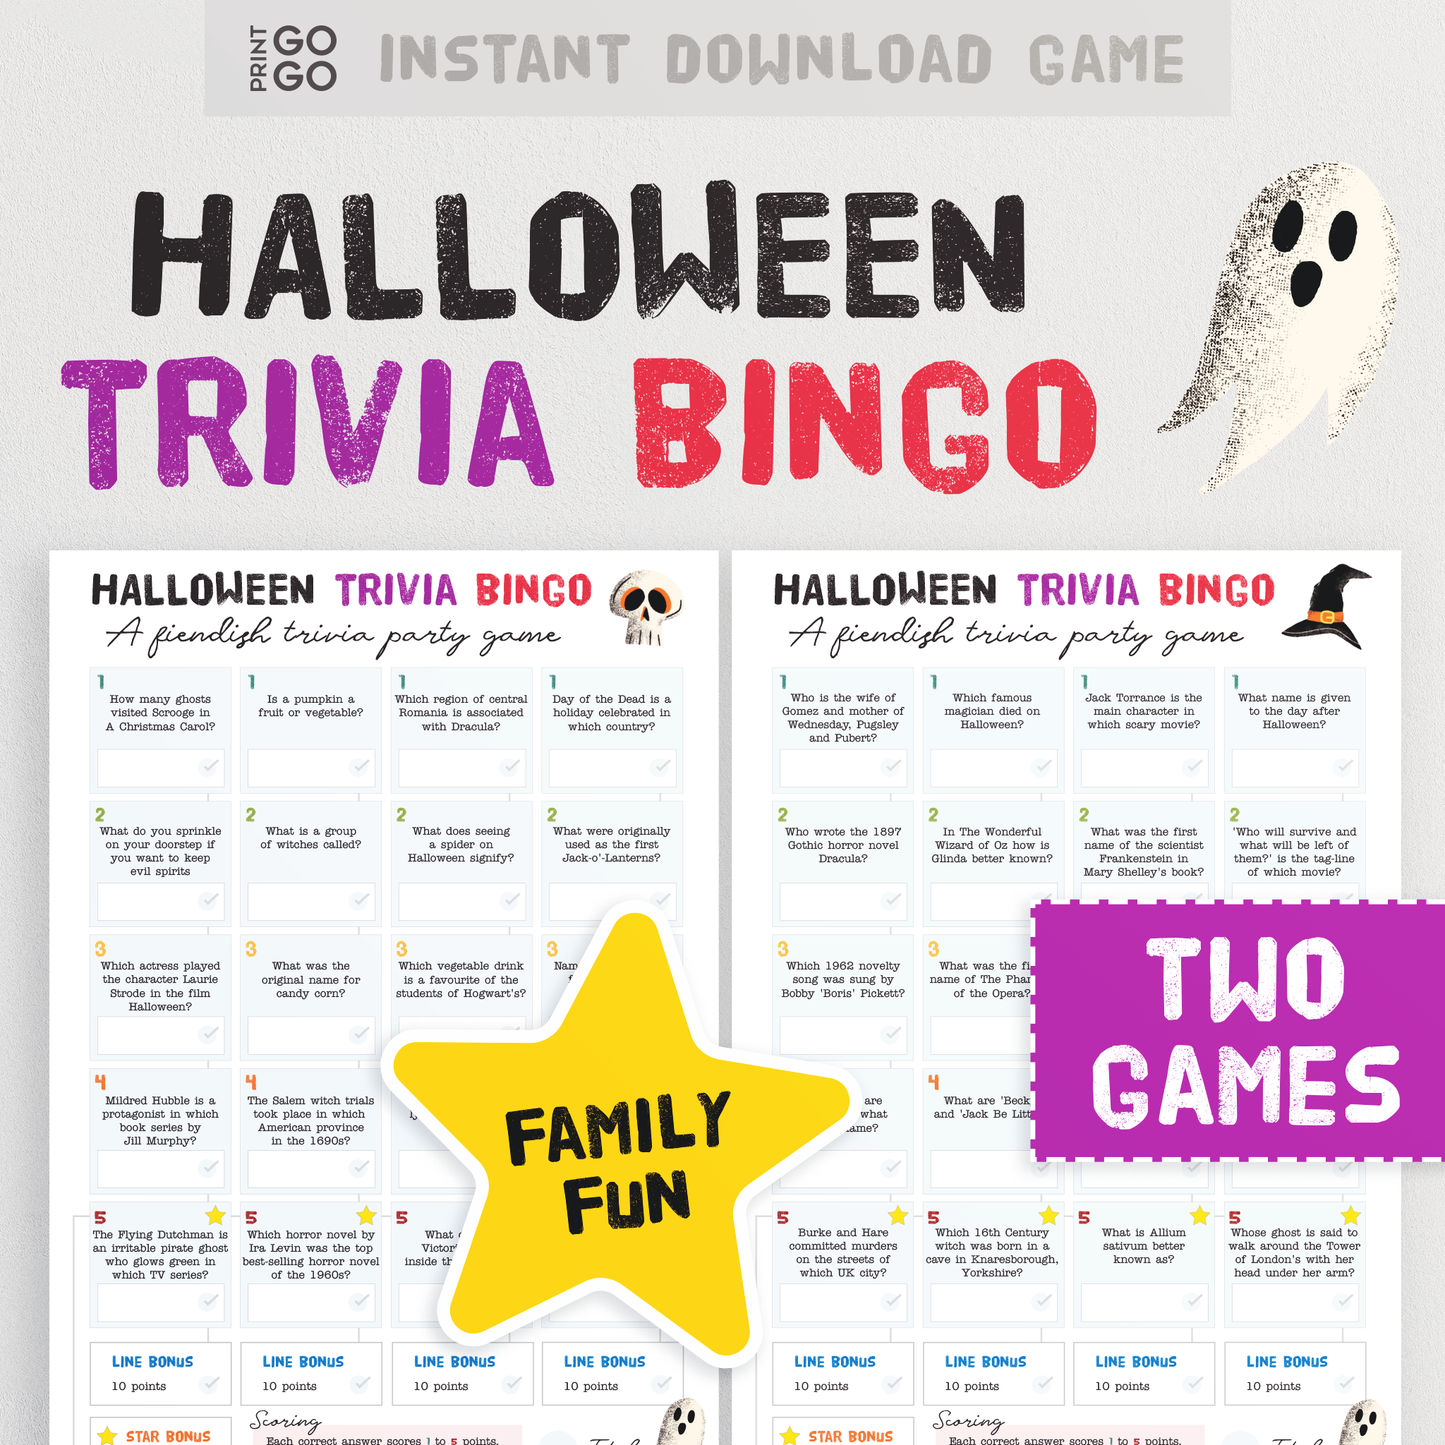 Halloween Trivia Bingo - Test Your Spooktacular Knowledge With This Fun Family Quiz Party Game | Hallows Eve Printable Pub Quiz Night